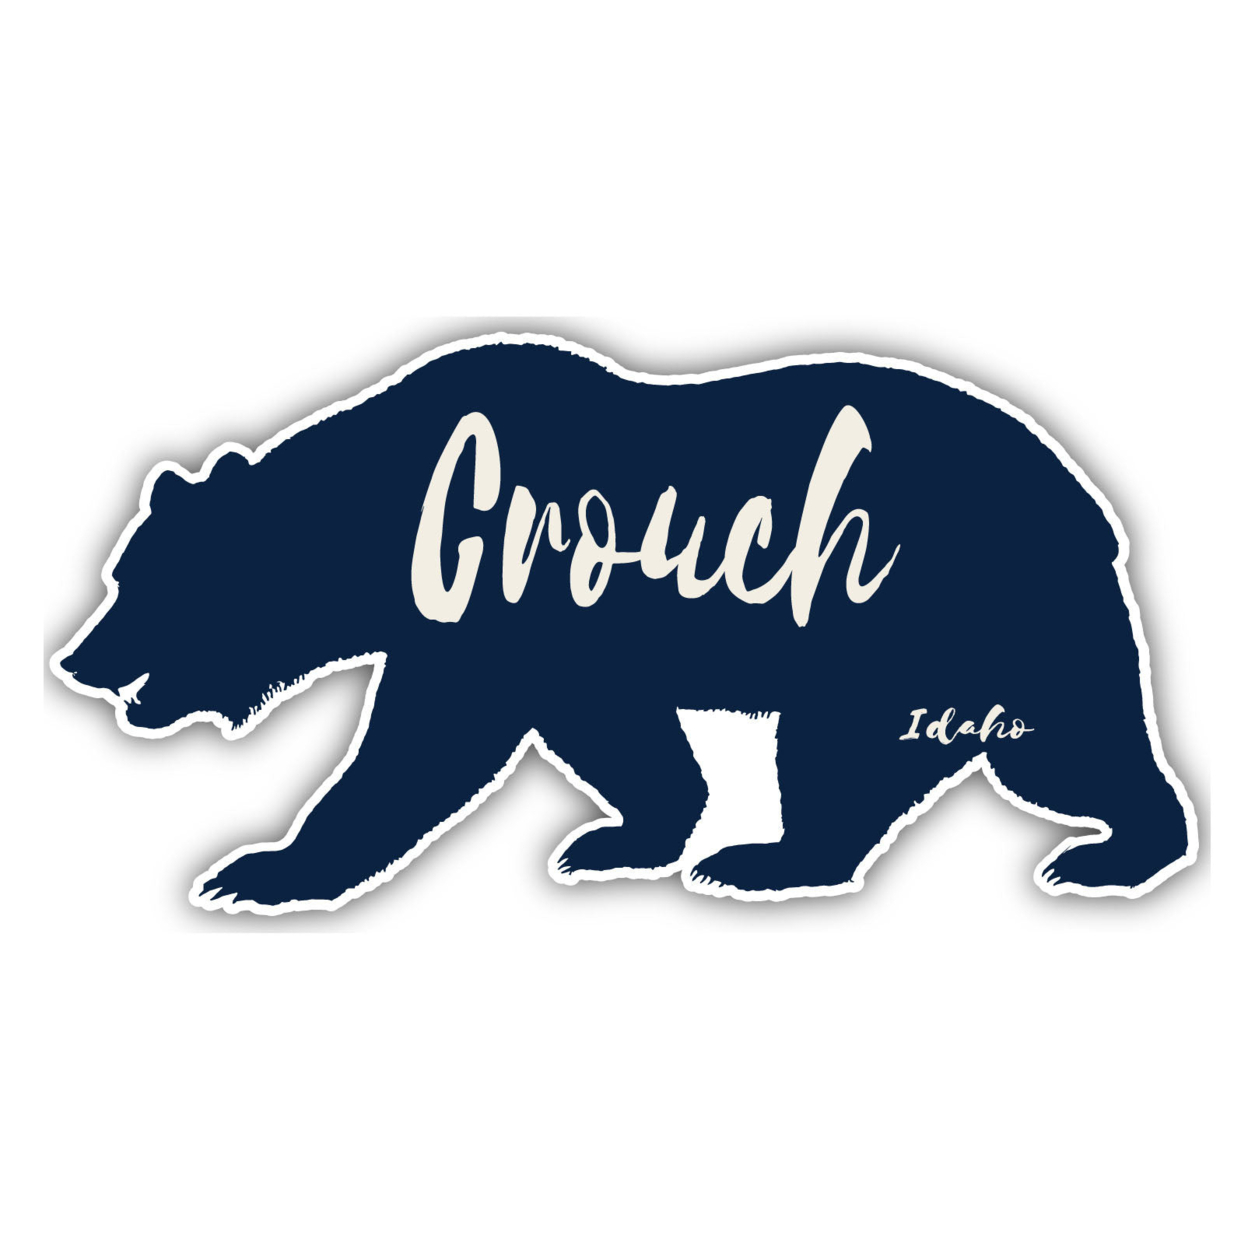 Crouch Idaho Souvenir Decorative Stickers (Choose Theme And Size) - 4-Pack, 4-Inch, Bear